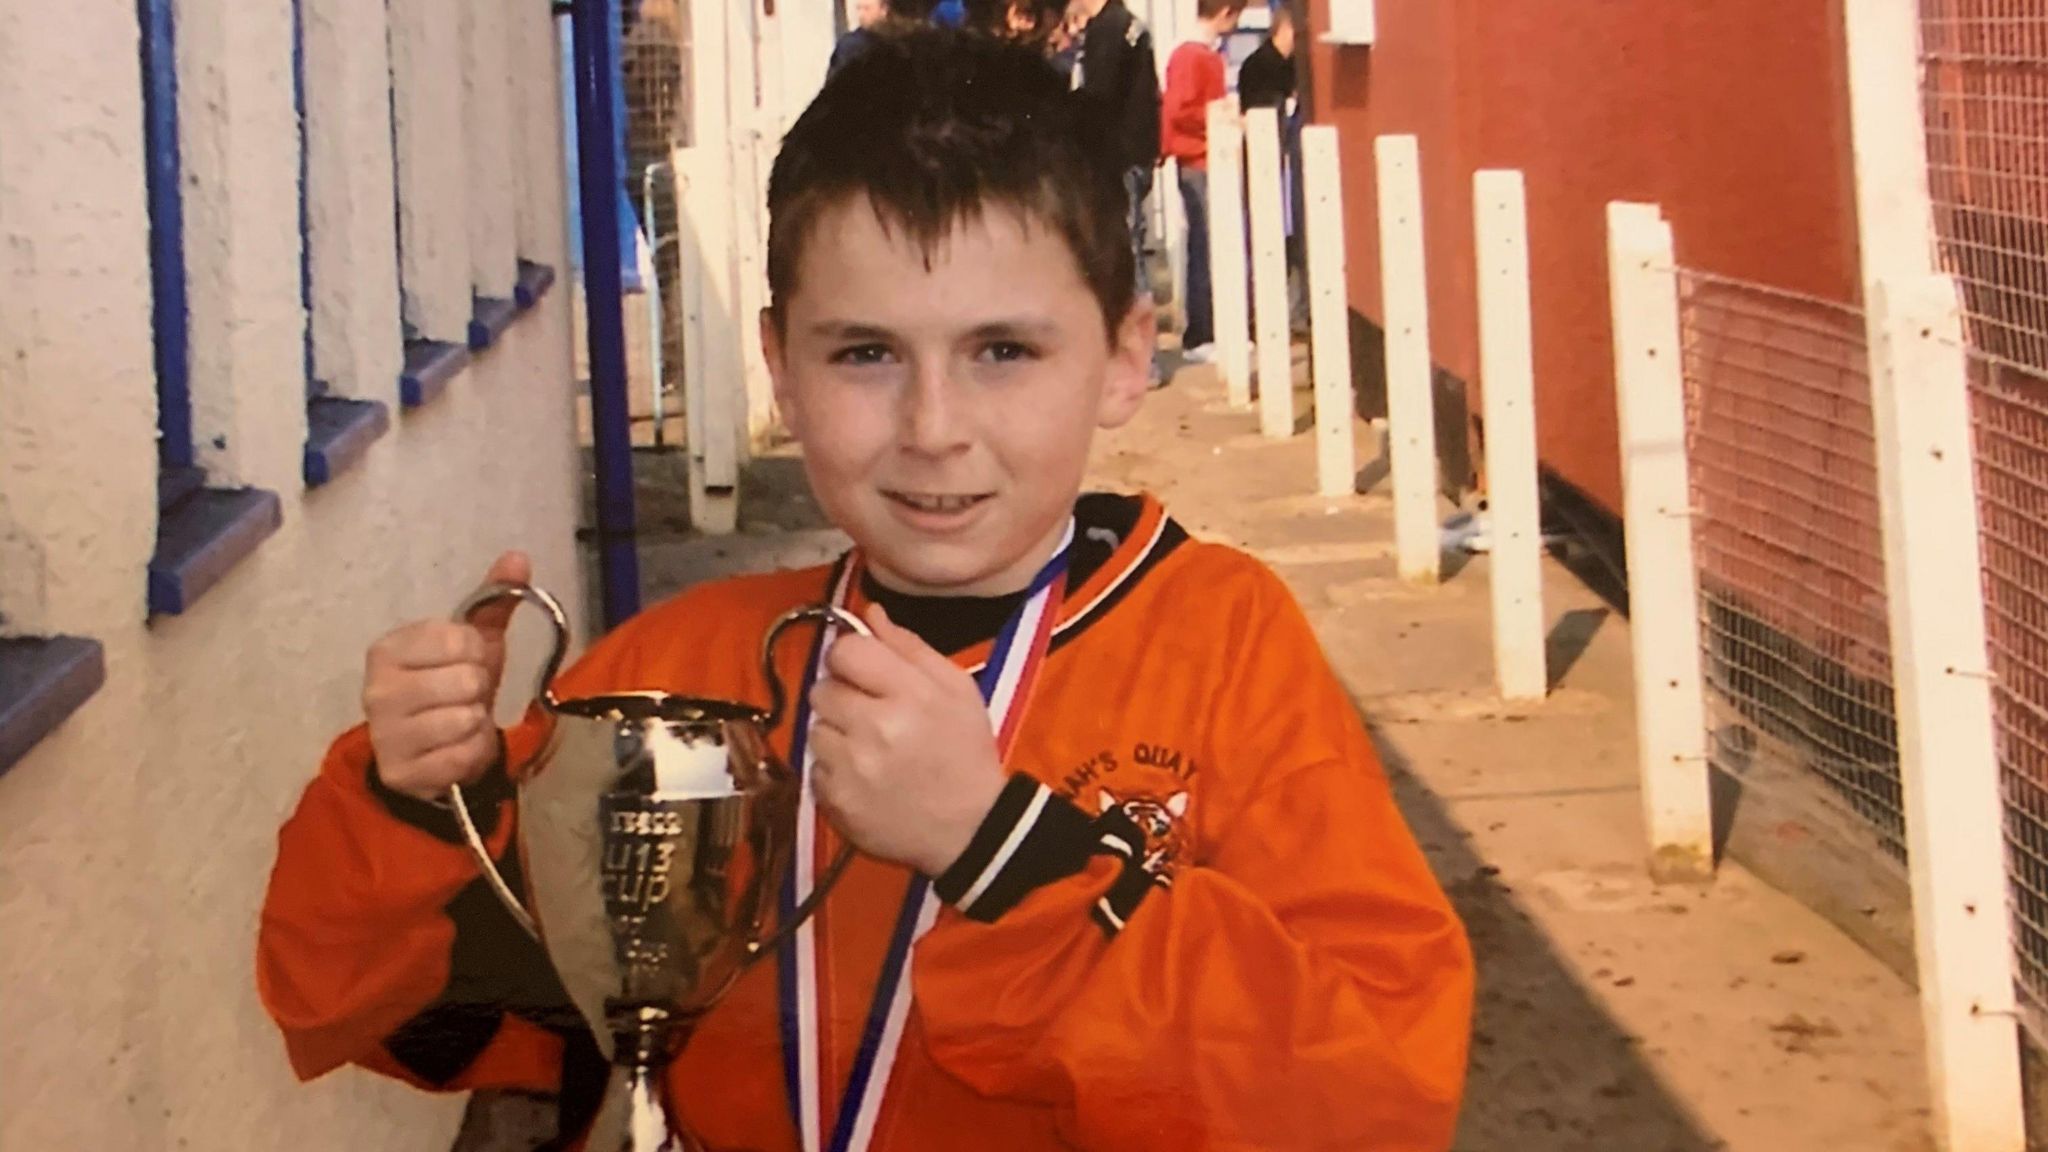 Jack Sargeant holding a trophy after winning the NWCFA Under-13s cup with Connah’s Quay Tigers